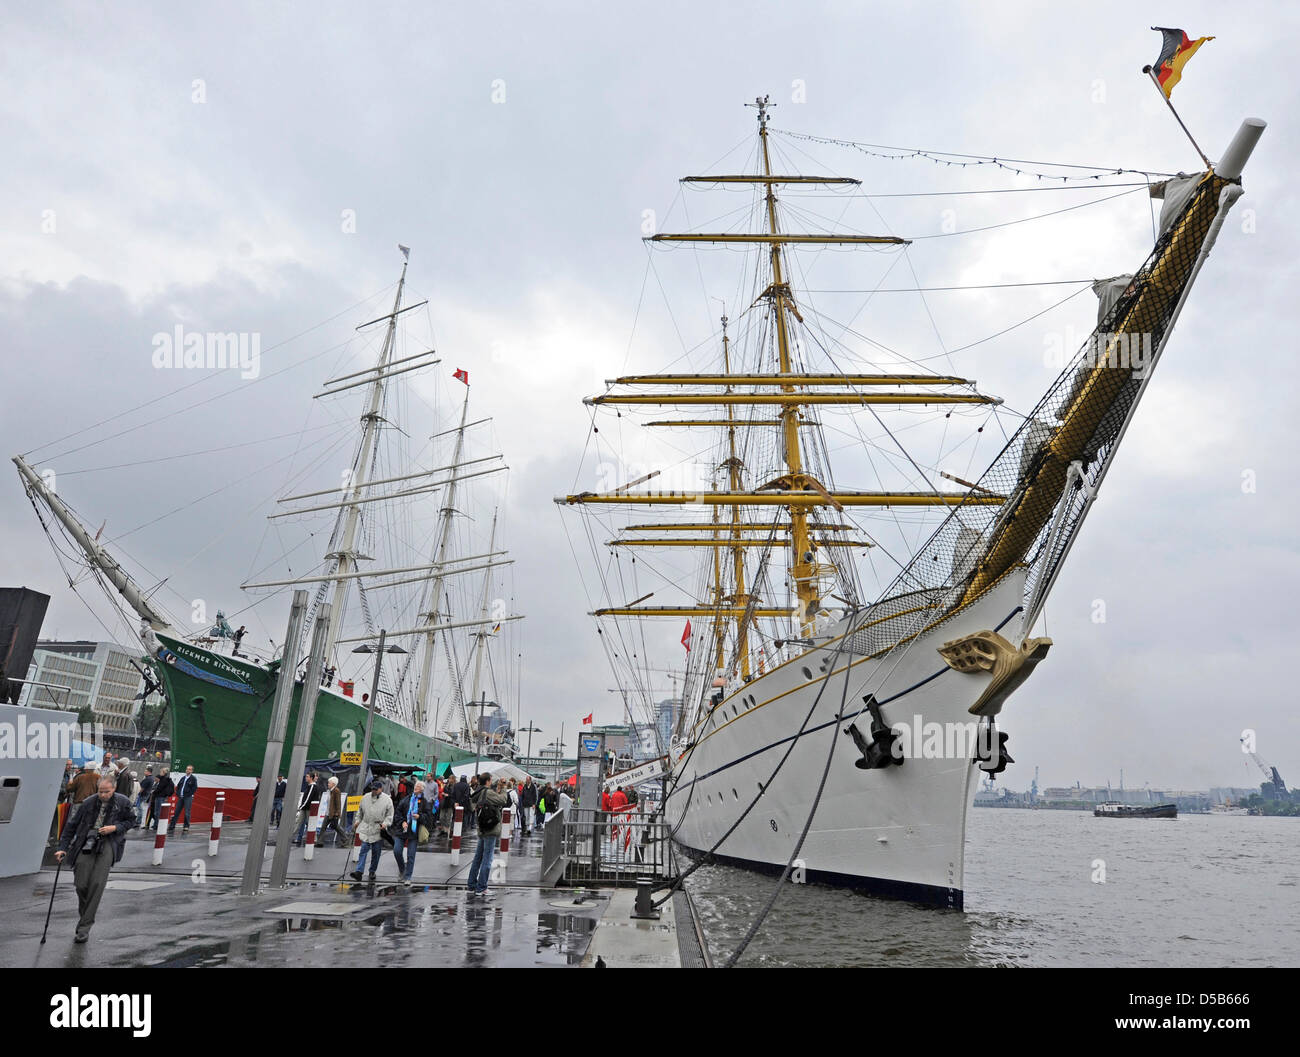 The sailing training ship 'Gorch Fock' of the German navy after runs into port at the harbour in Hamburg, Germany, 05 August 2010. The training ship leaves for South America on 20 August 2010. Photo: Fabian Bimmer Stock Photo